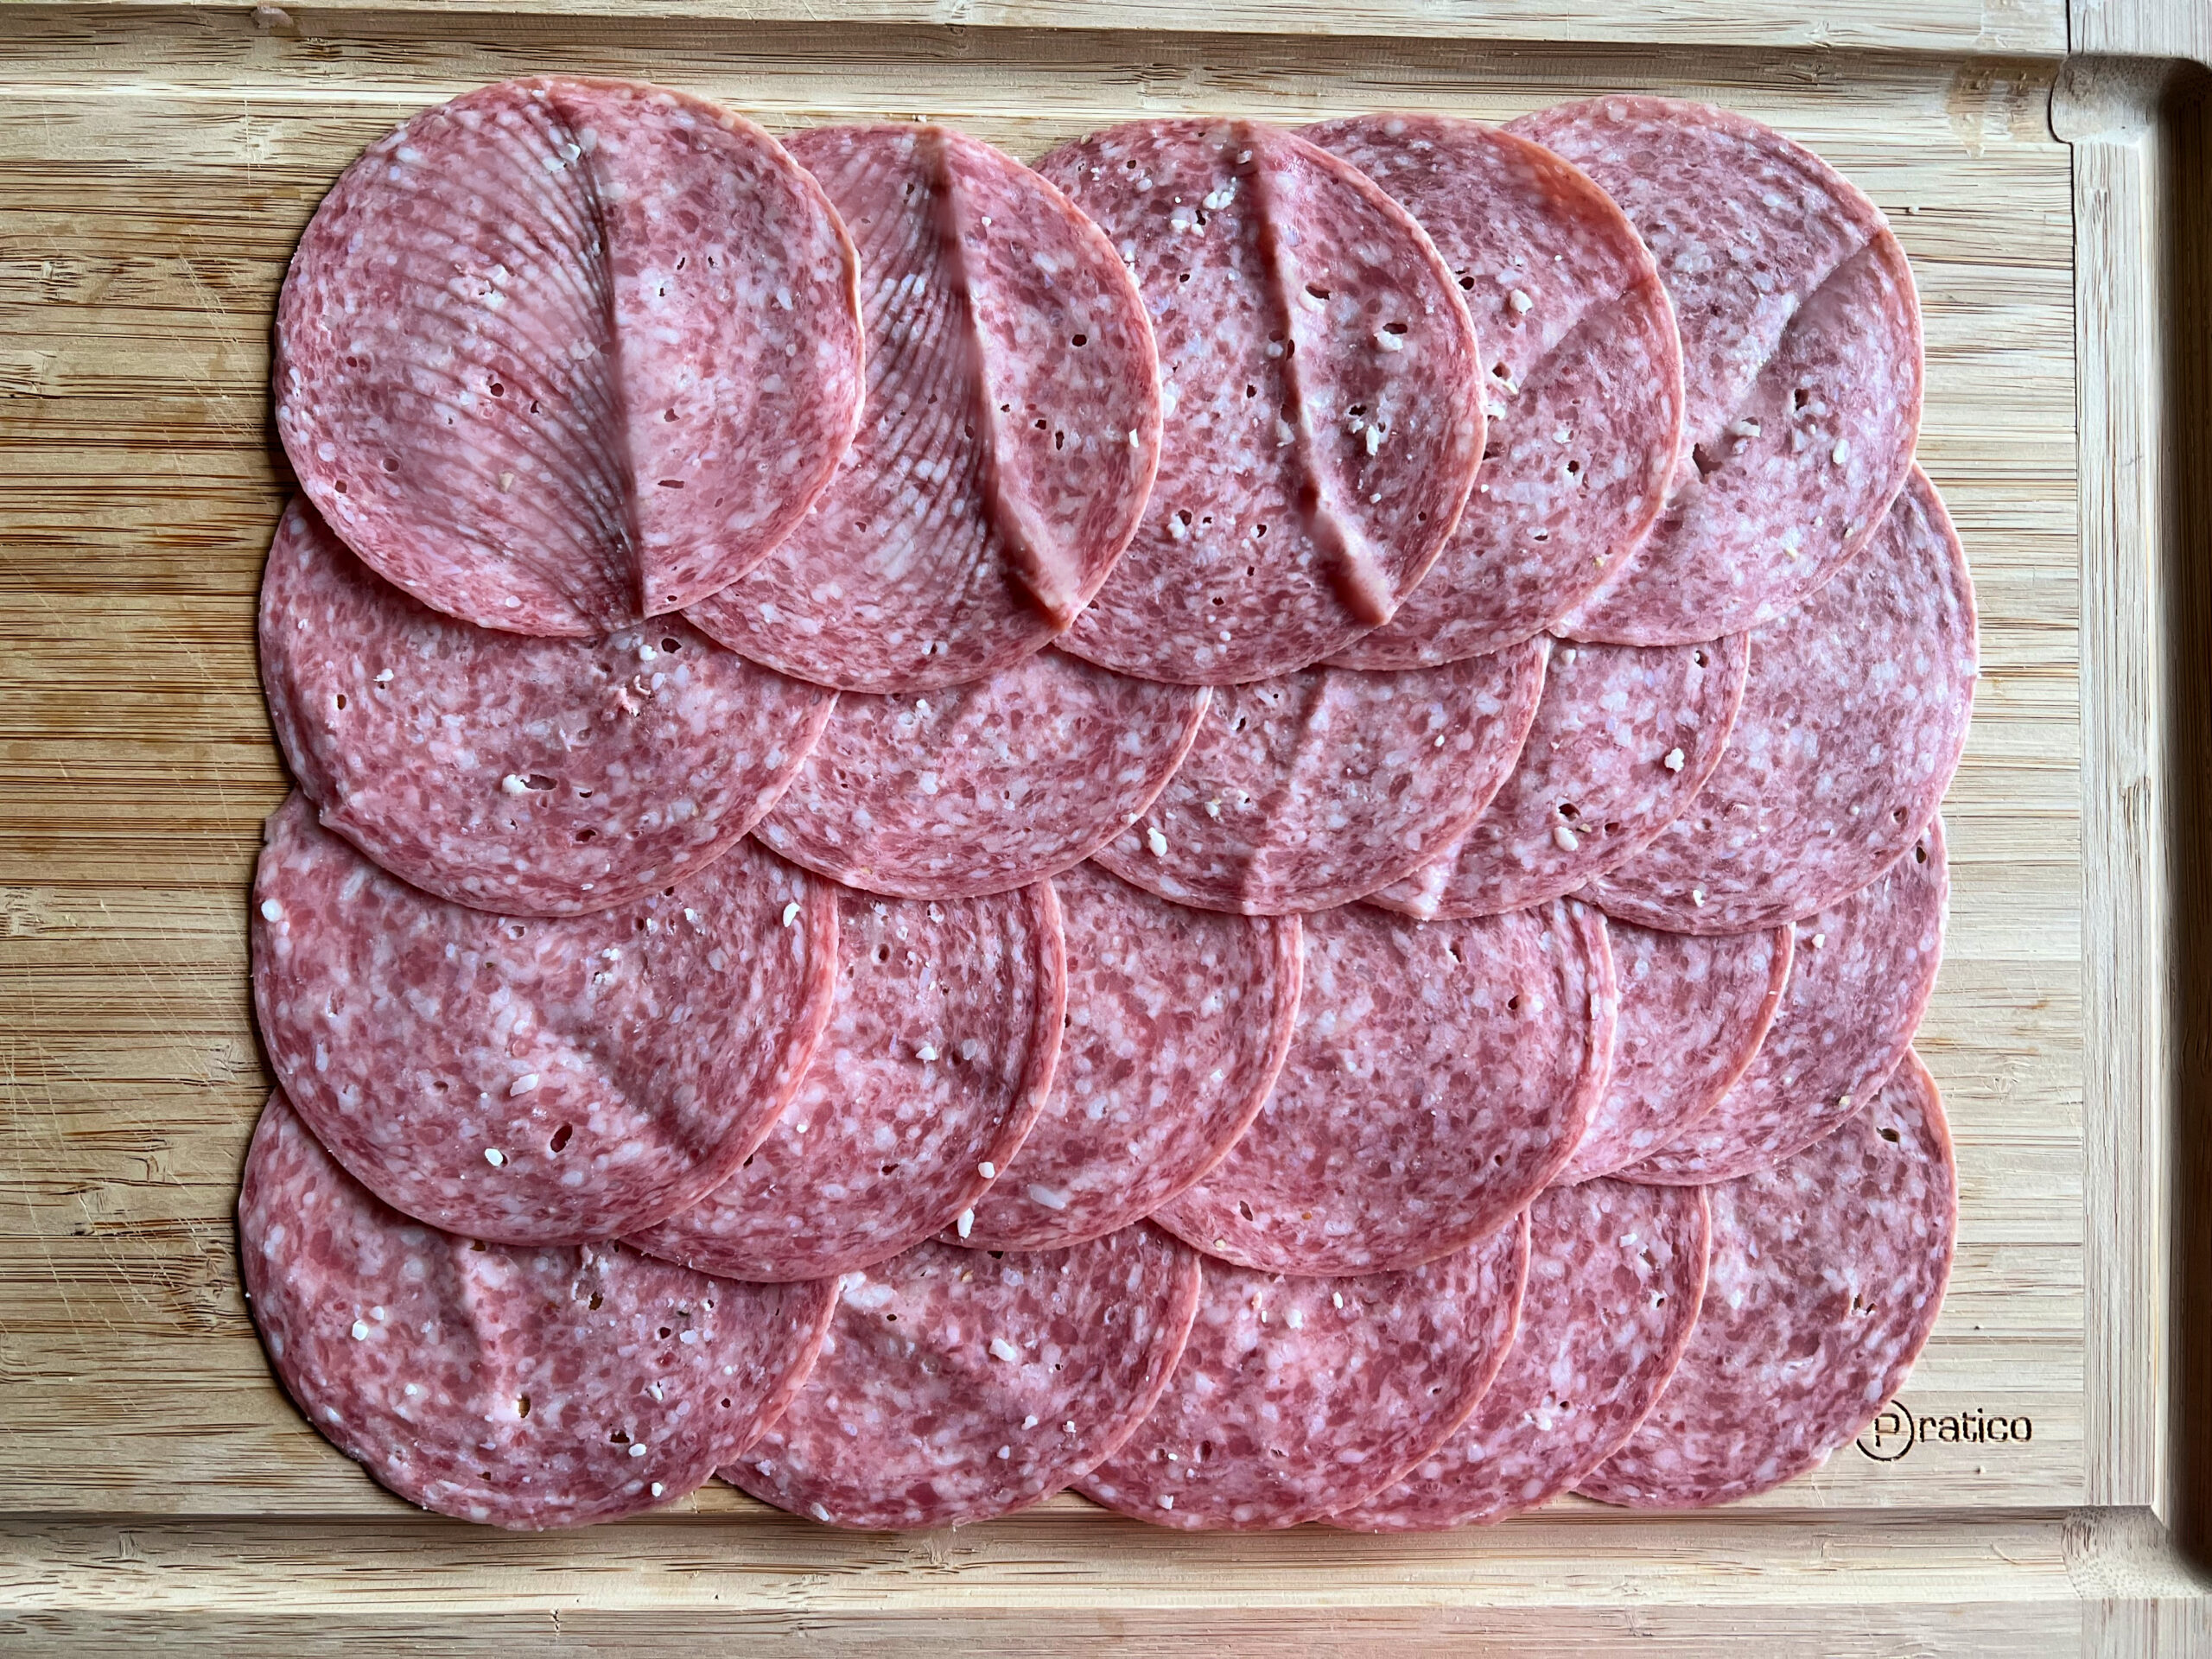 This photo shows salami slices on a cutting board placed in 4 rows, with 5 pieces of salami in each, overlapping, forming a rectangle. 